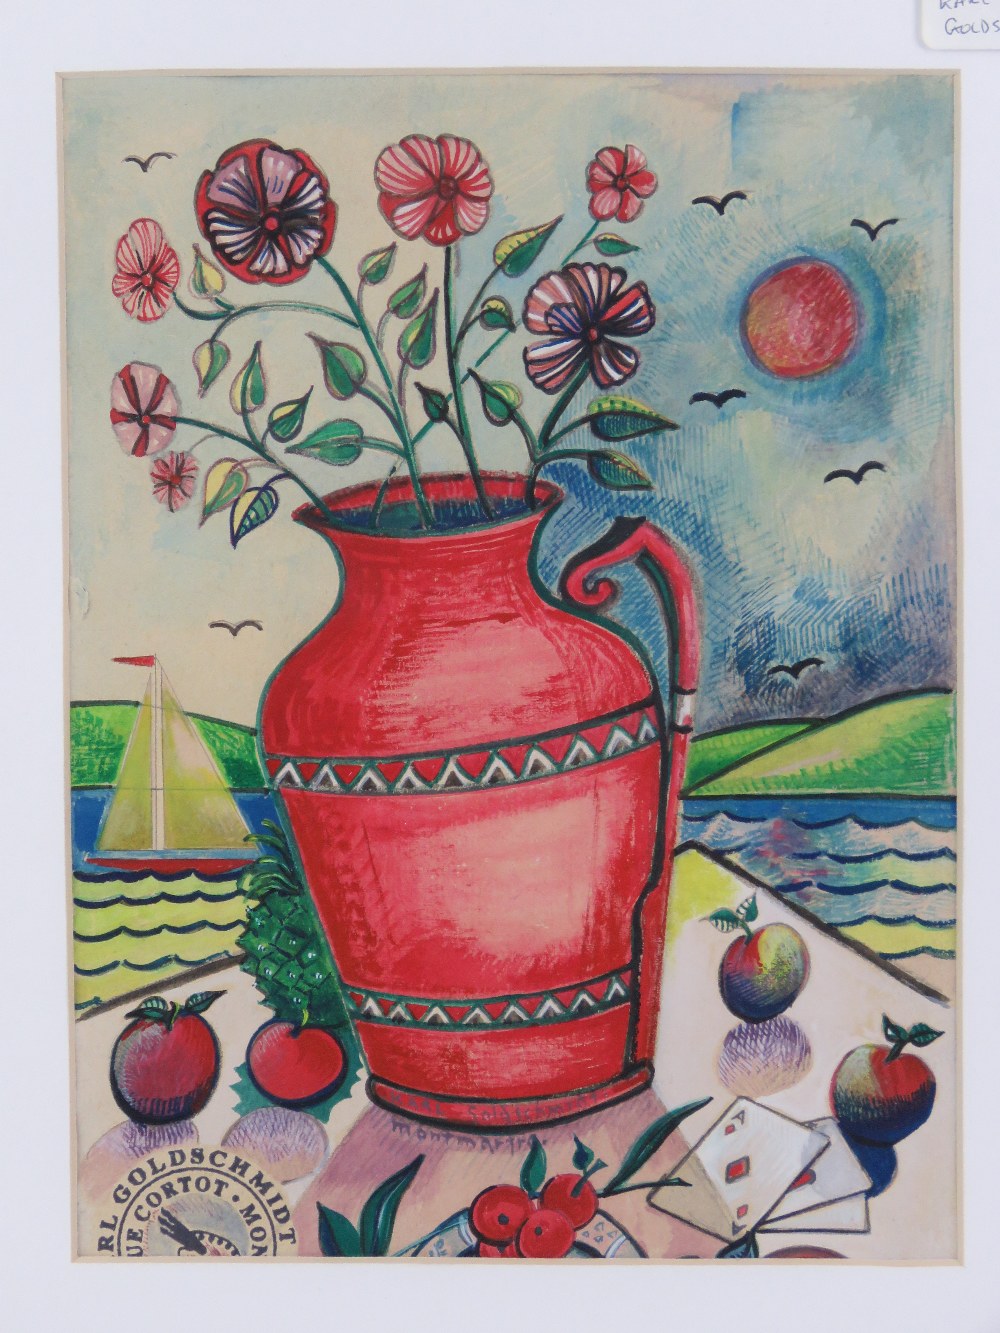 Gouche painting by Karl Goldschmidt, still life vase of lowers with sail boat beyond, - Image 5 of 6